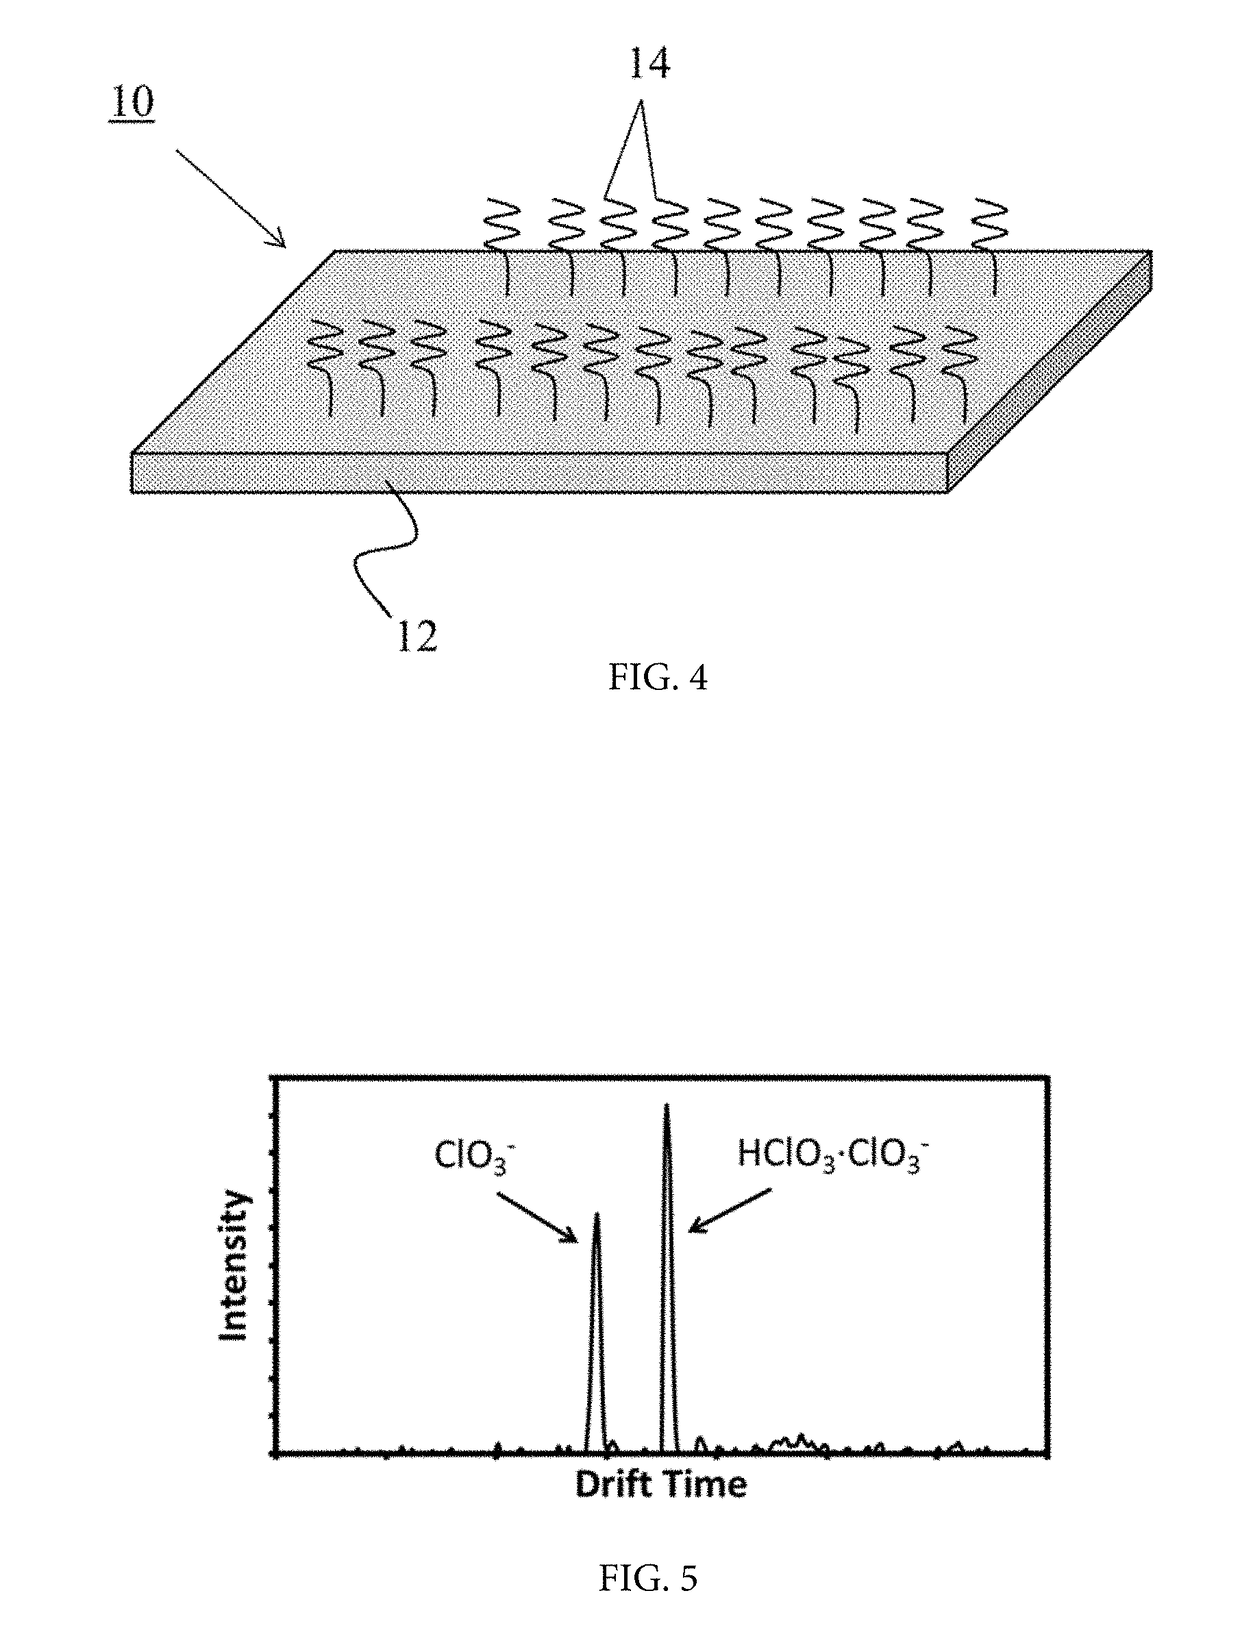 Substrate Containing Latent Vaporization Reagents